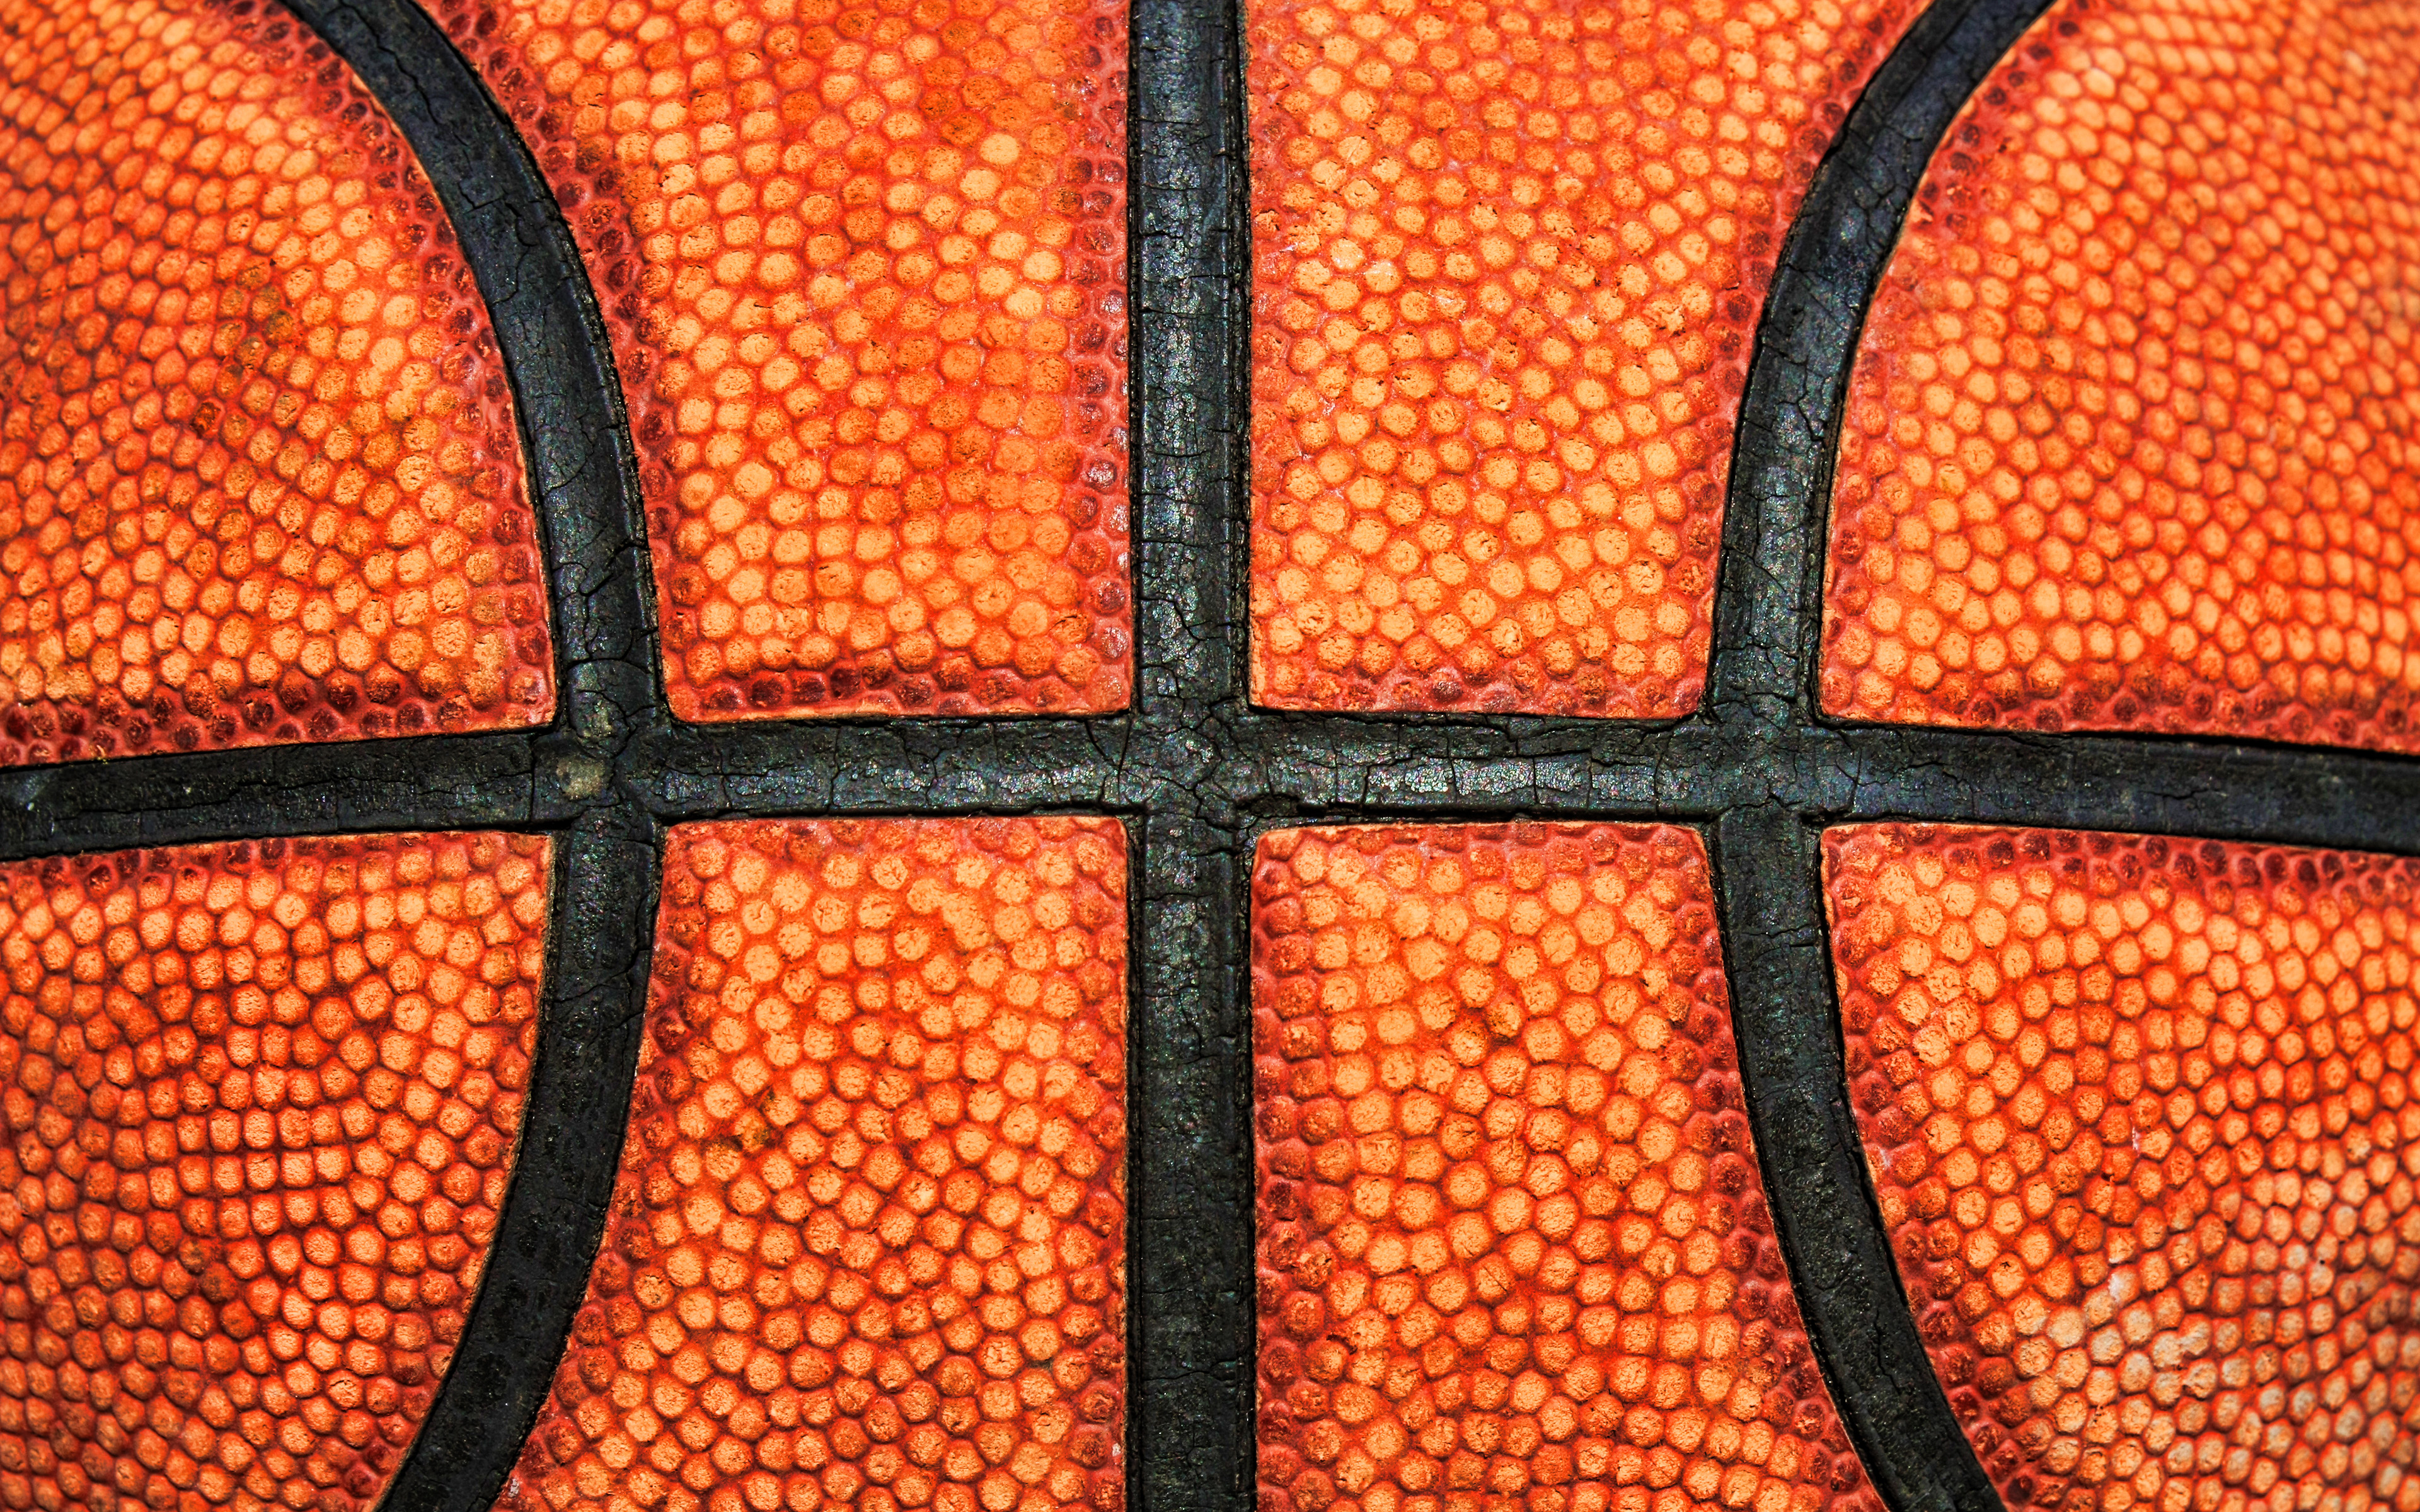 Download wallpapers basketball ball, 4k, basketball, orange ball, basketball  ball texture, orange backgrounds, ball, basketball textures, basketball  backgrounds for desktop with resolution 3840x2400. High Quality HD pictures  wallpapers